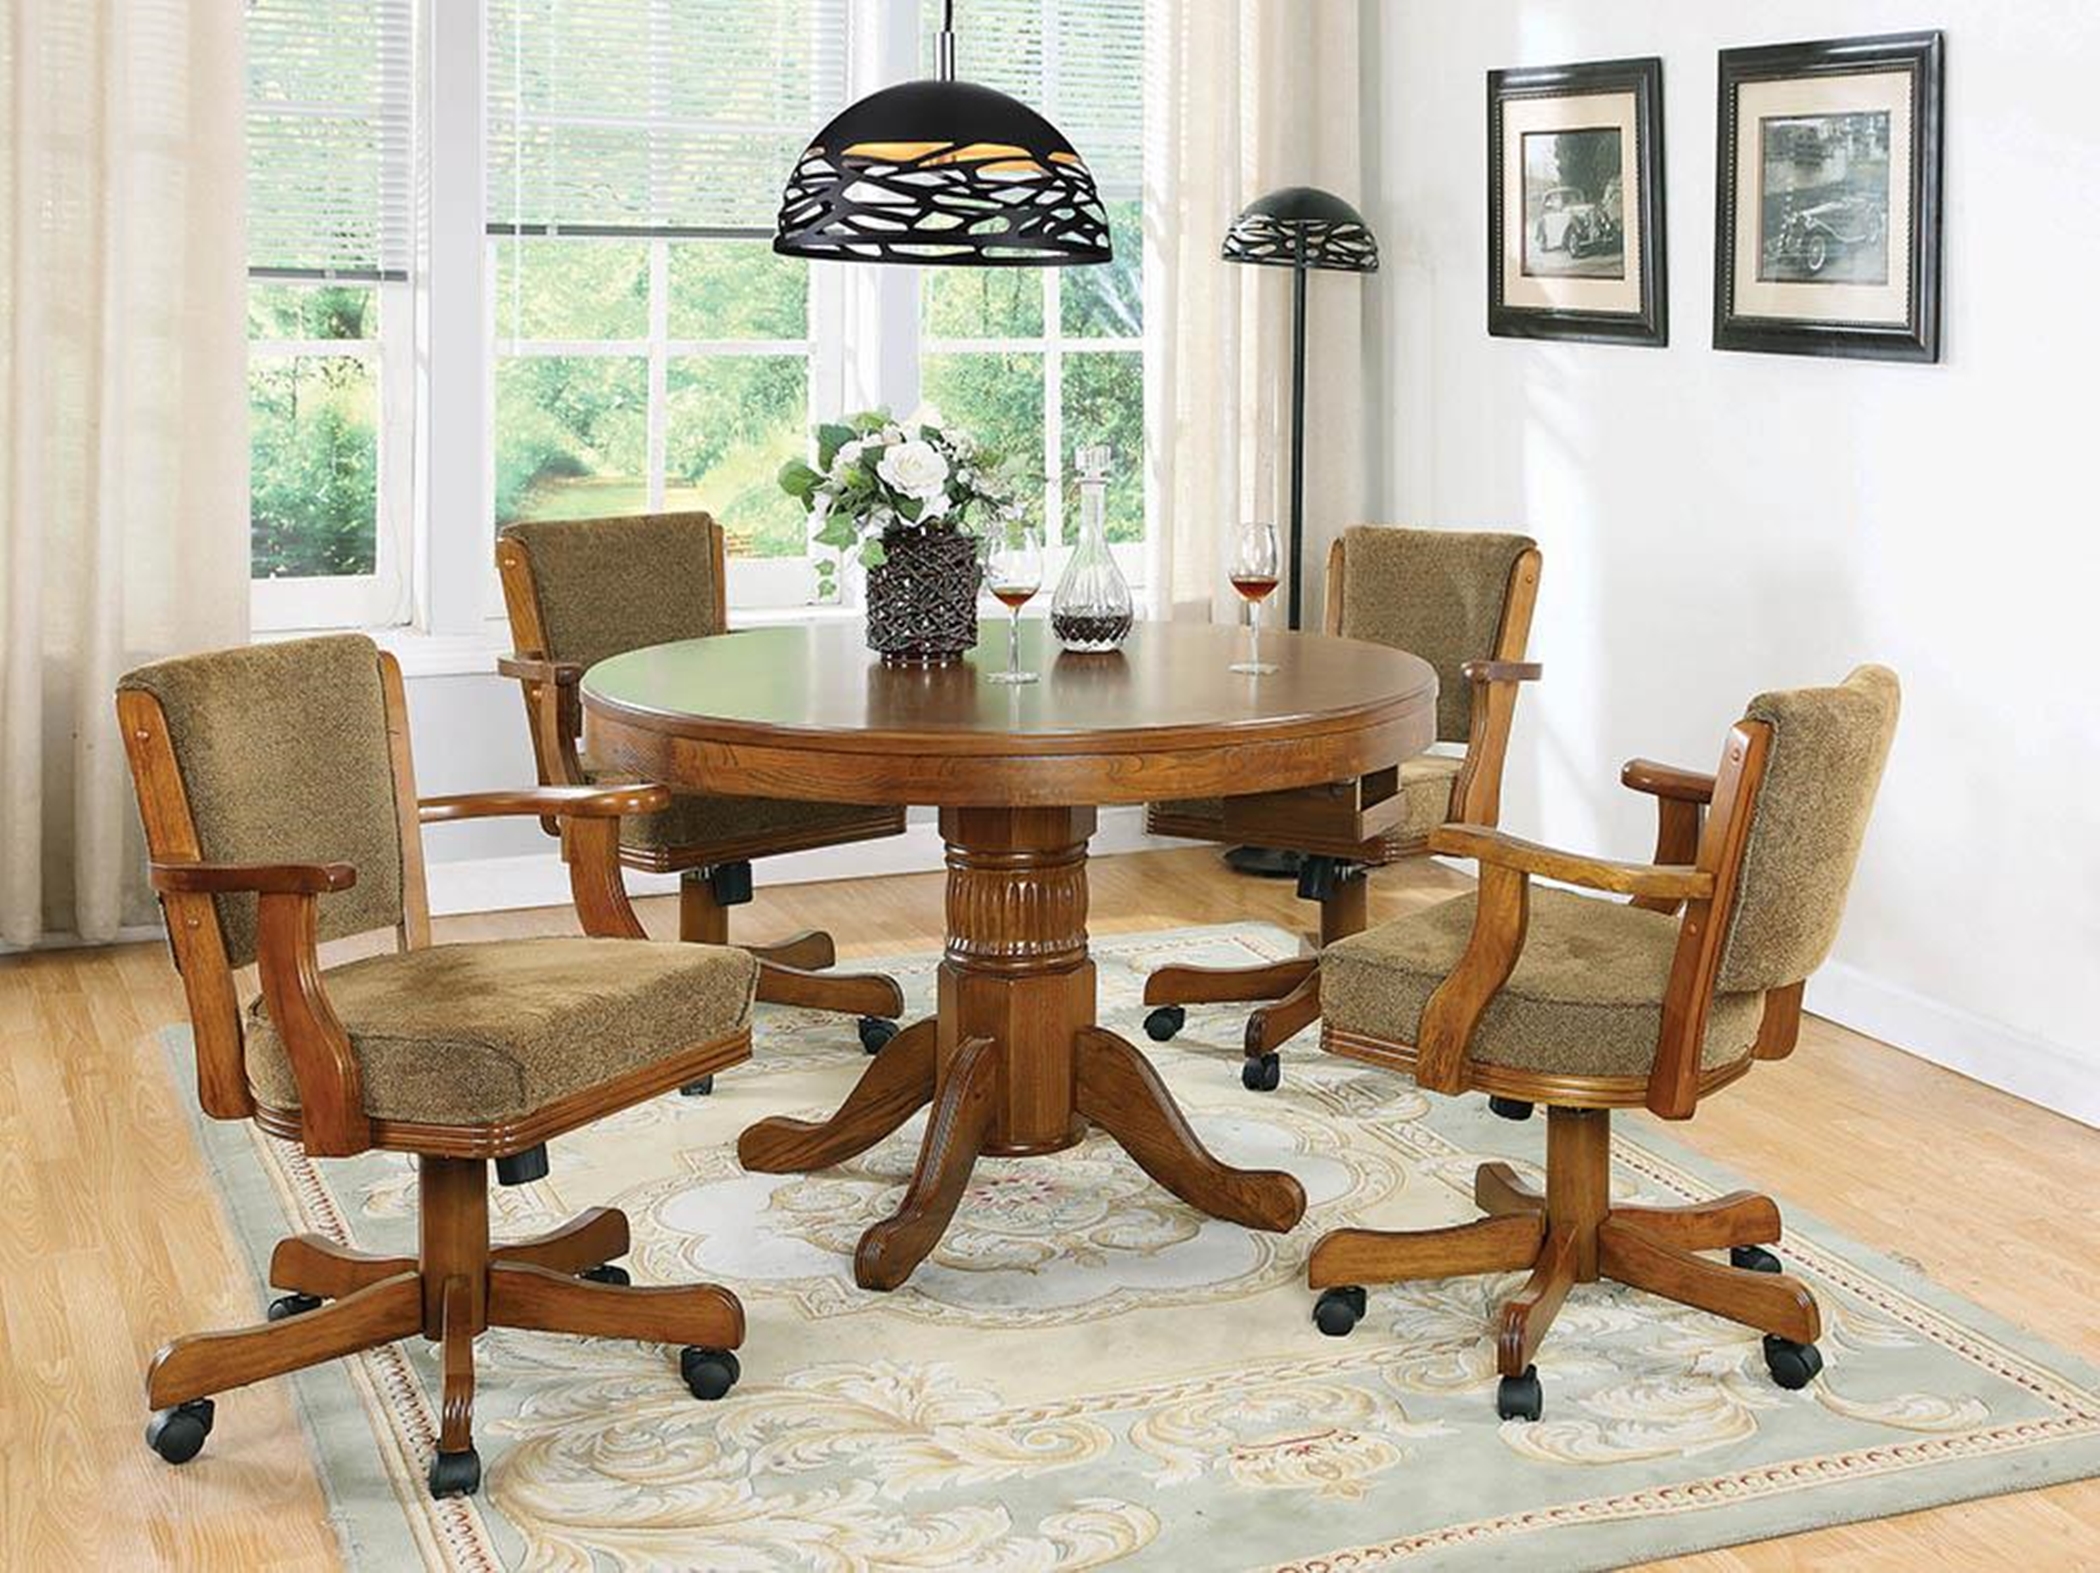 Mitchell Traditional Oak Game Table